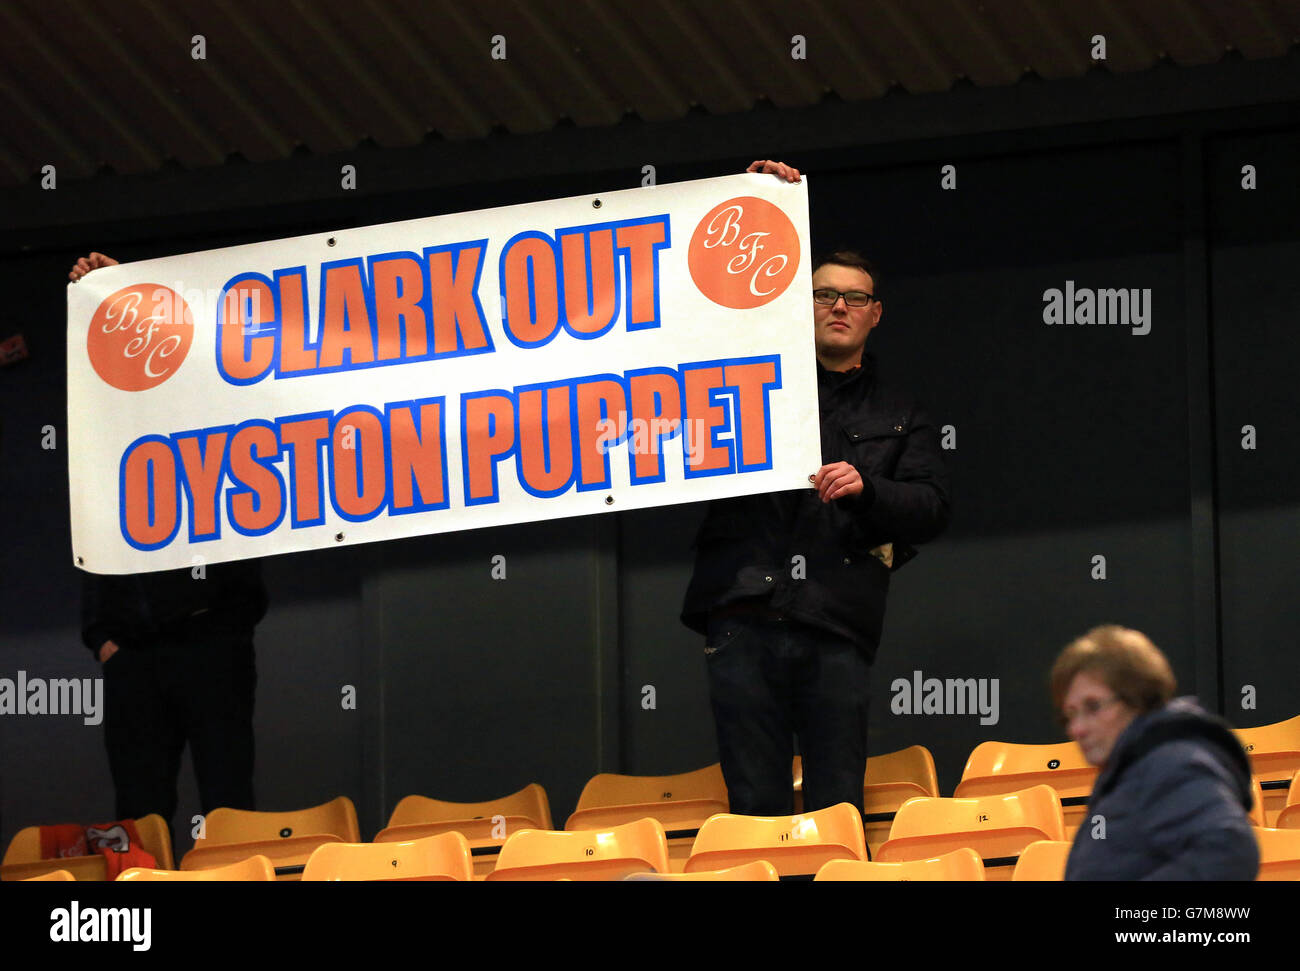 Blackpool fans hold a sign reading "Clark Out Royston Puppet" during the  match Stock Photo - Alamy